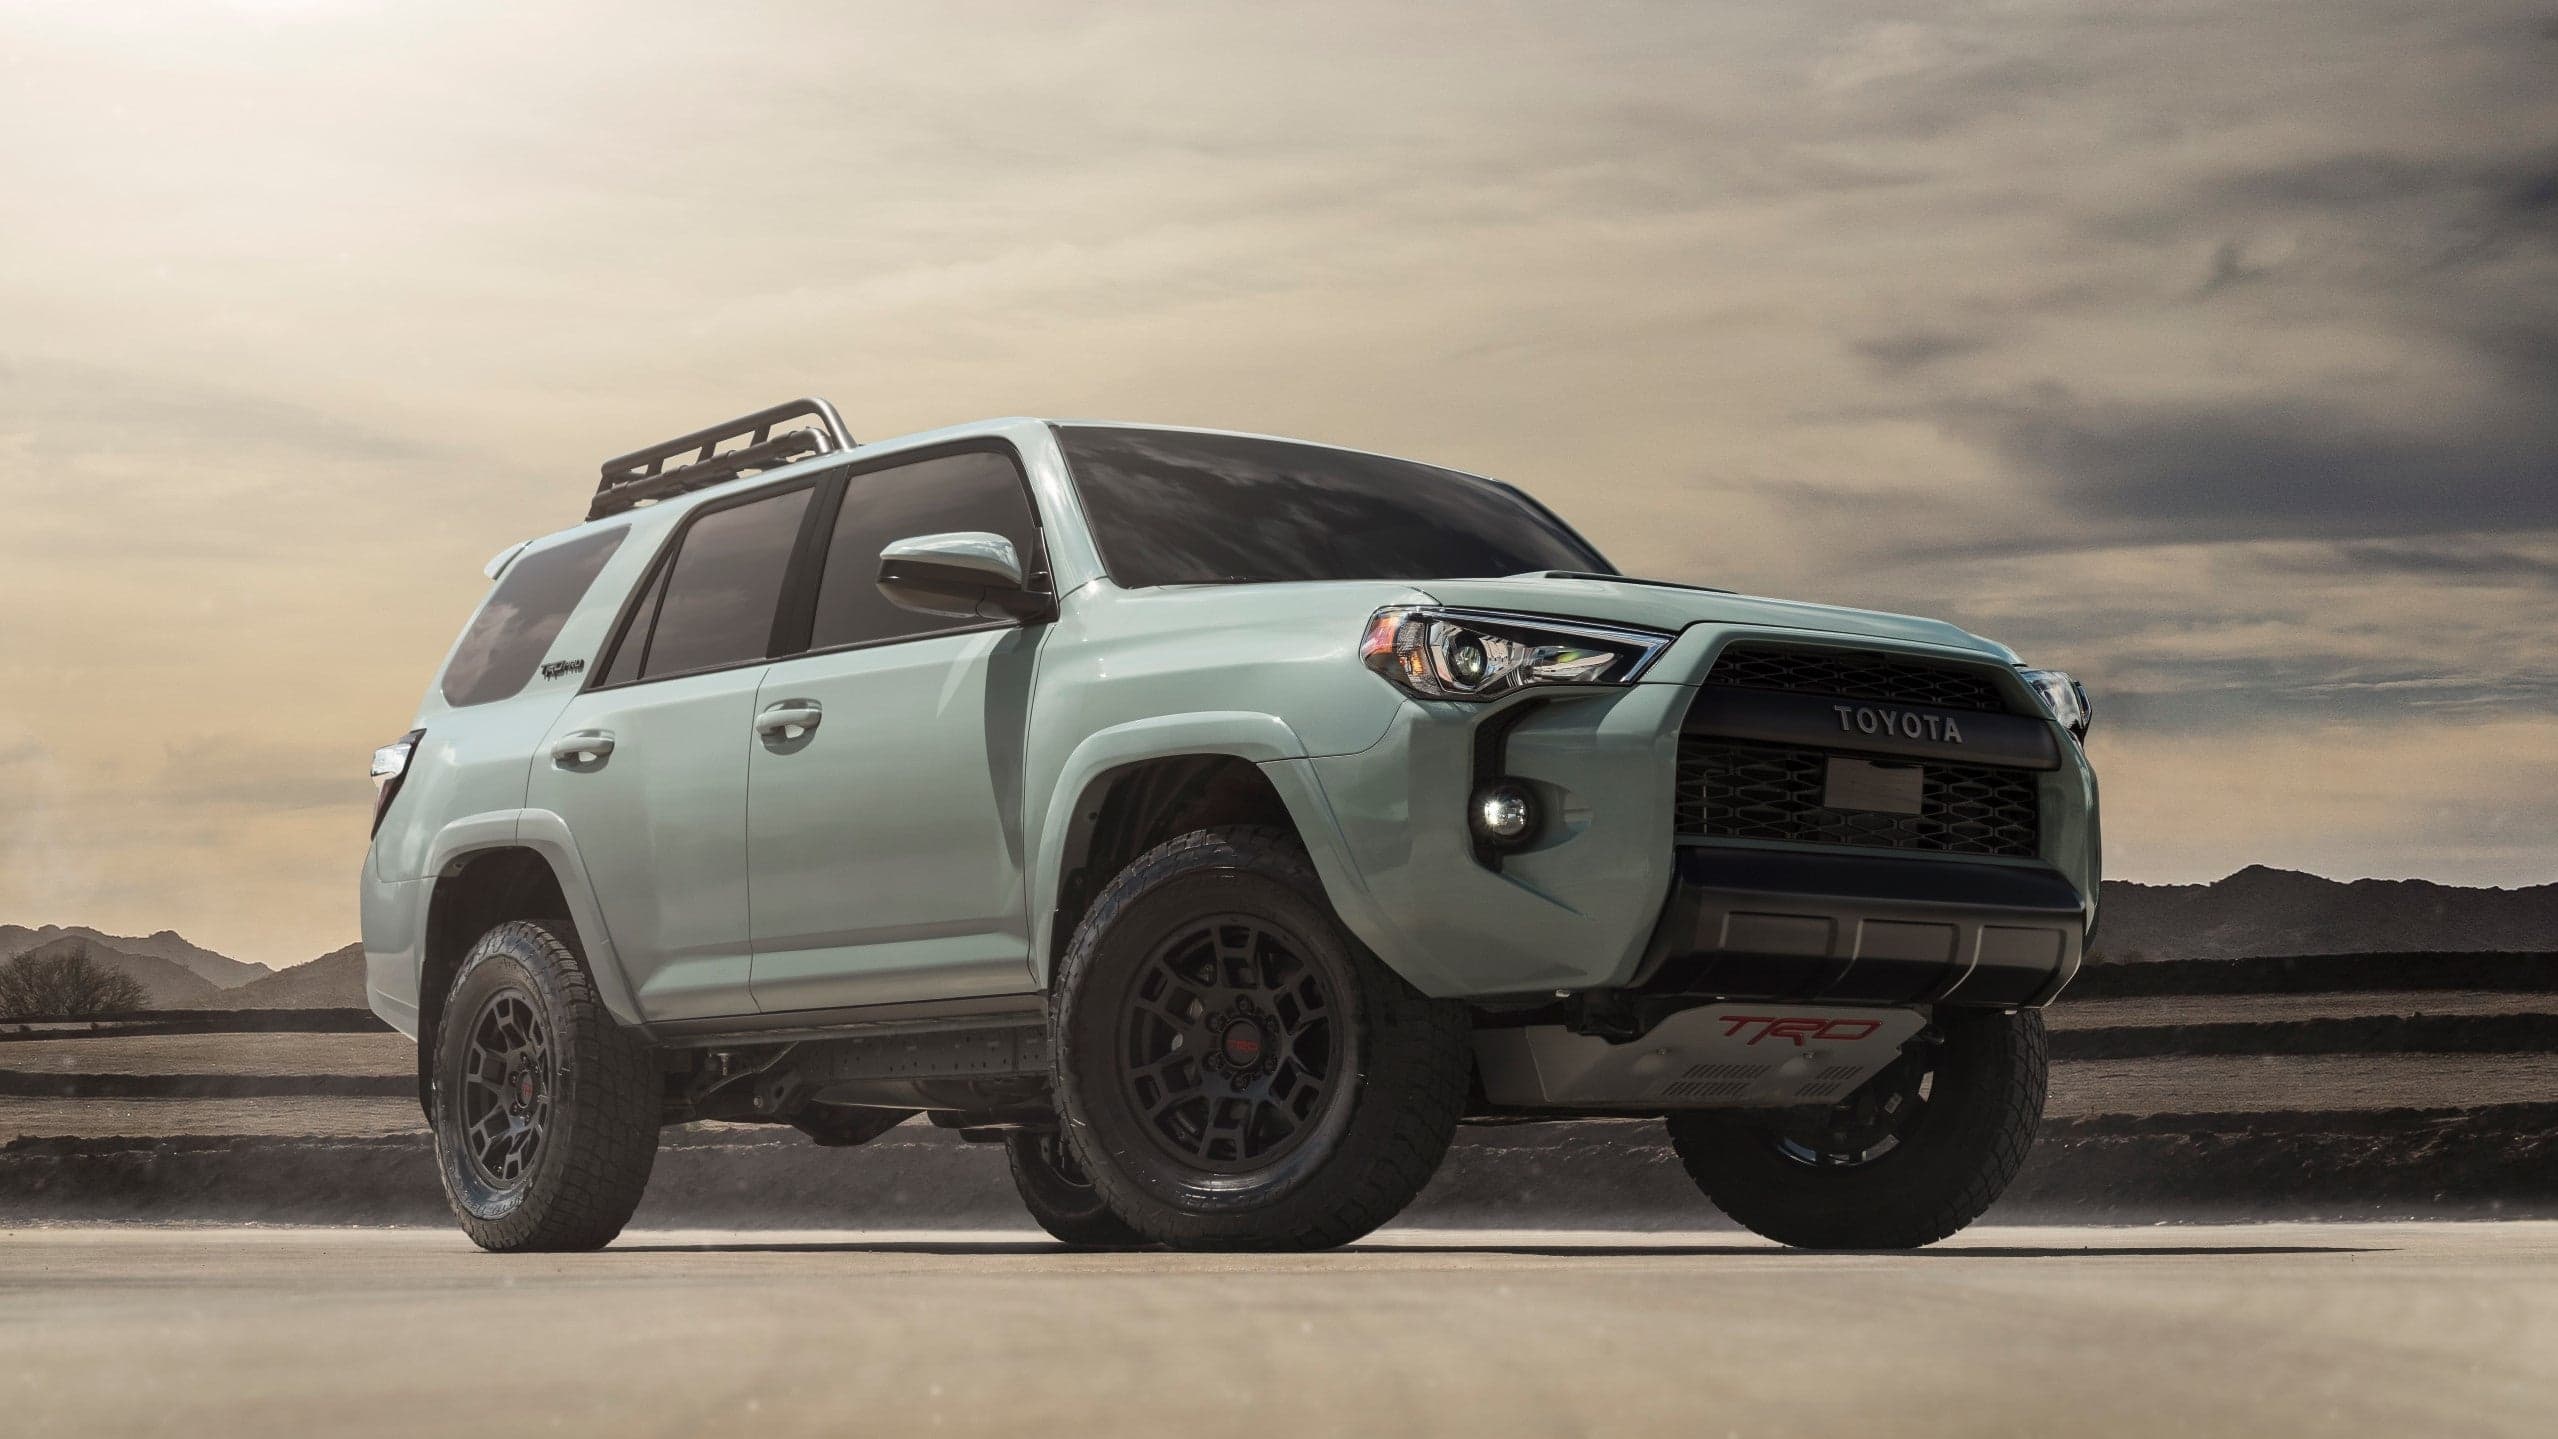 2021 Toyota 4Runner TRD Pro: New LED Headlights and Lunar Rock Color